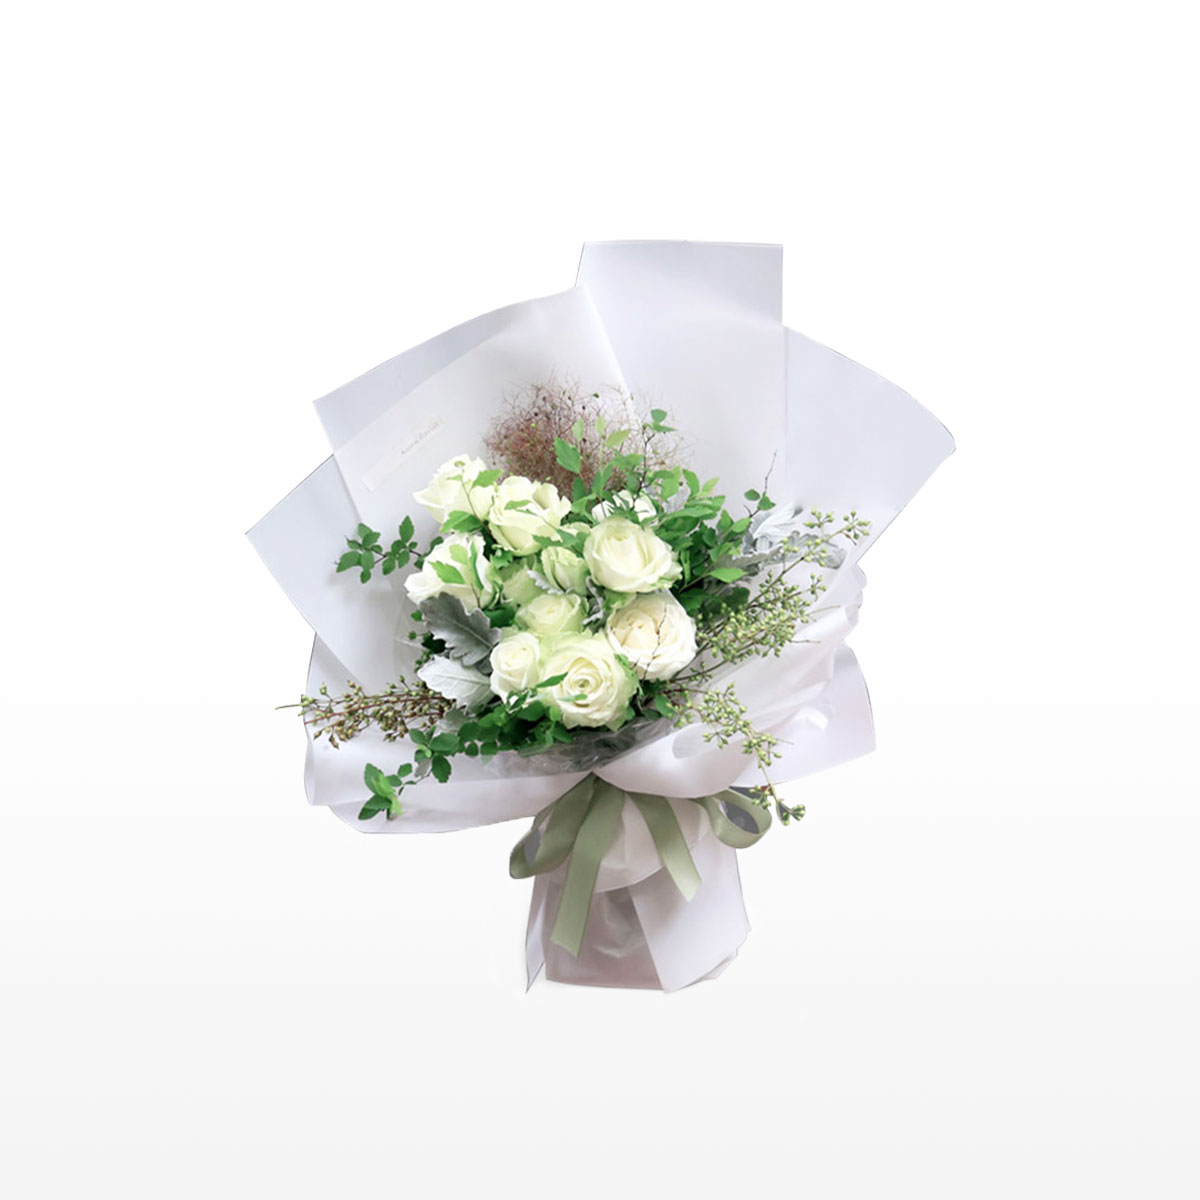 Medium bouquet of 9 white roses and seasonal green flowers wrapped in quality matte paper